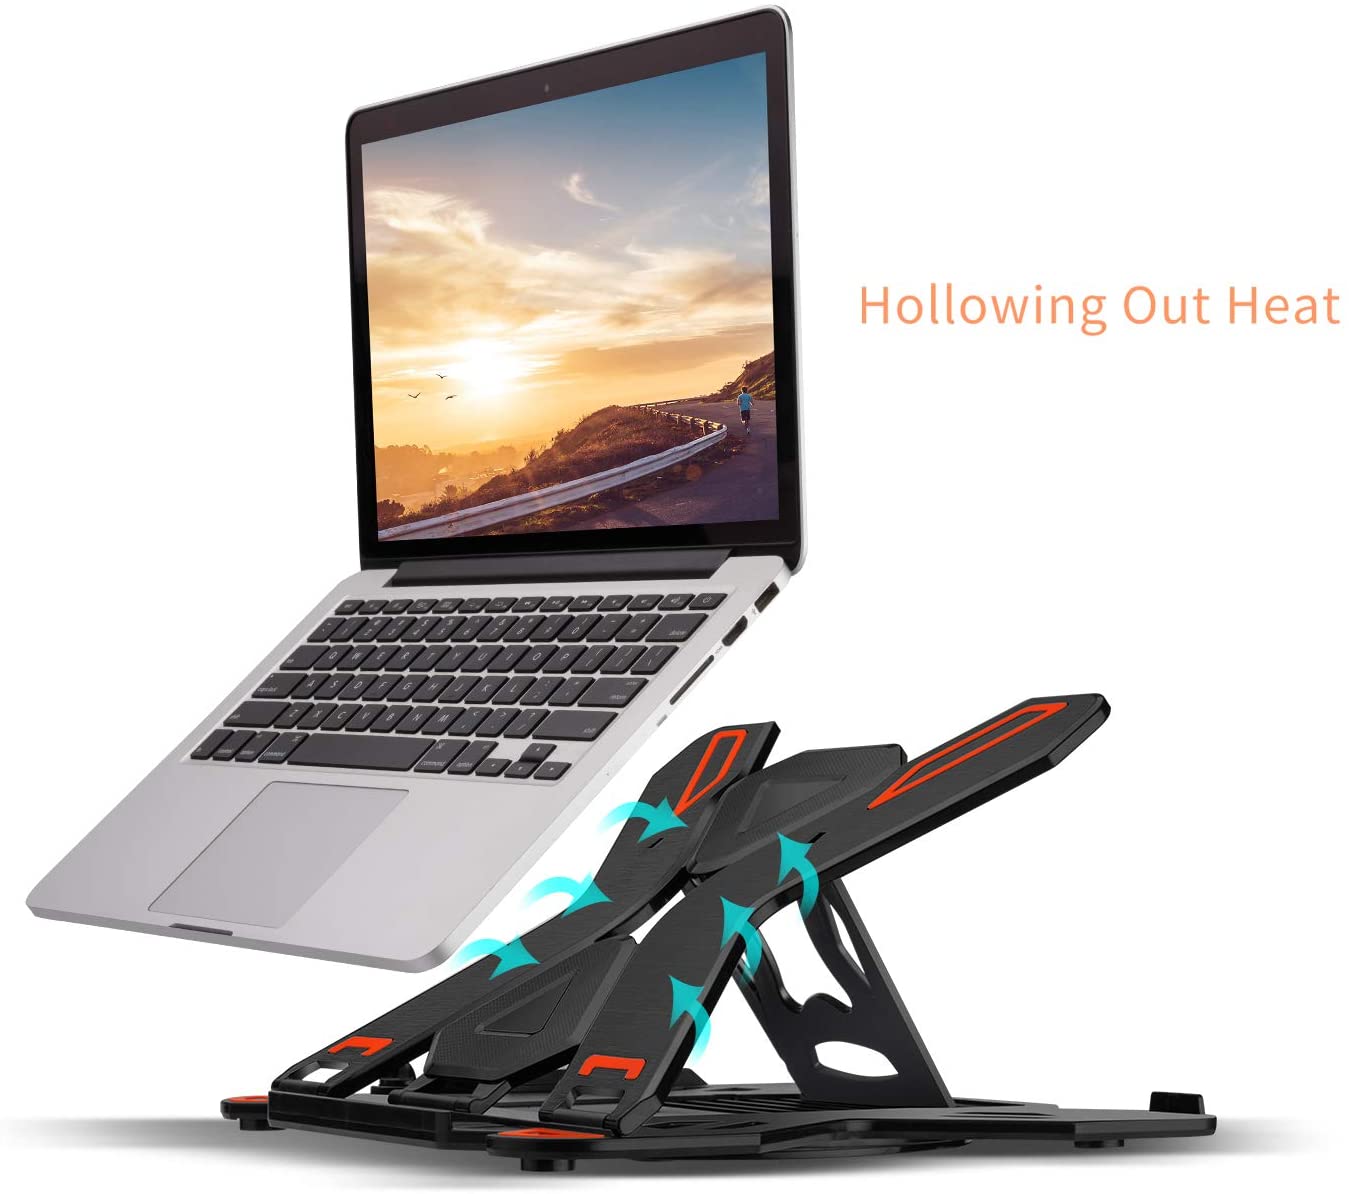 Laptop Stand Adjustable Laptop Computer Stand Multi-Angle Stand Phone Stand Portable Foldable Laptop Riser Notebook Holder Stand Compatible for 10 to 17” Laptops - image 3 of 7